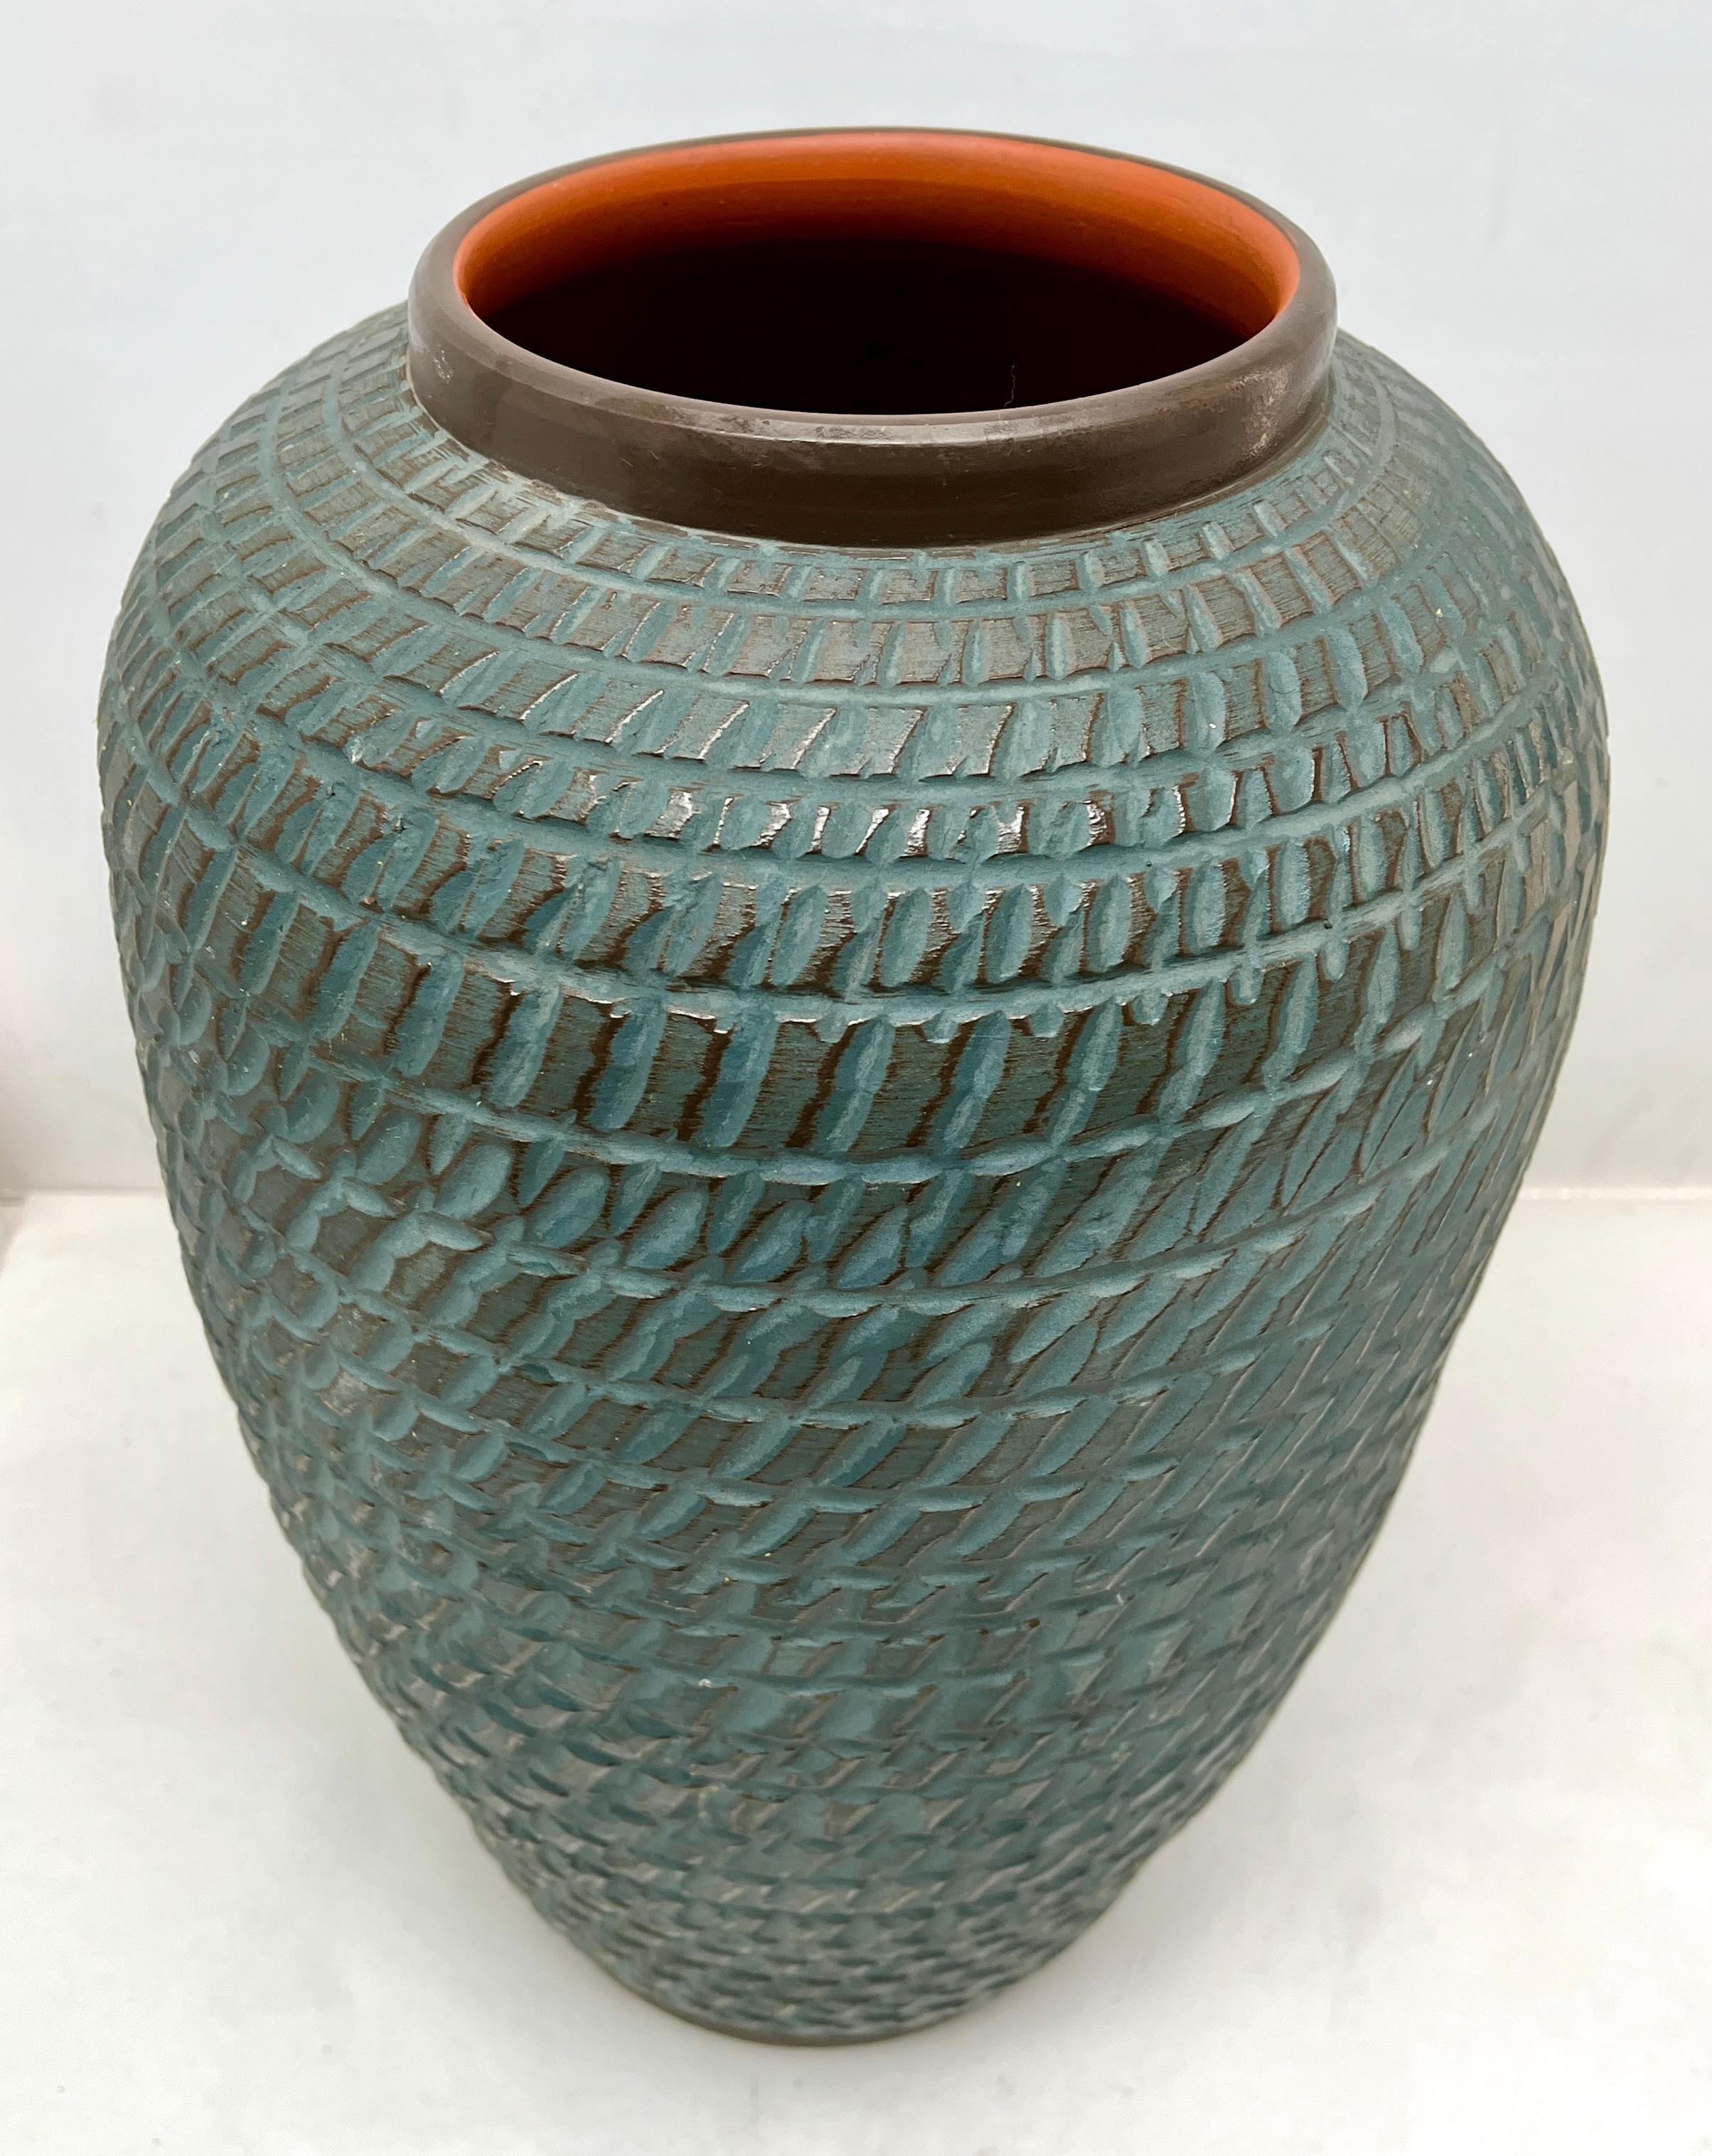 These original vintage vase was produced in the 1970s in Germany. It is made of ceramic pottery.
The bottom are marked the vase series number 40 Handarbeit
Straight forward and minimalistic design of the 1960s design era. 
Super rare in this